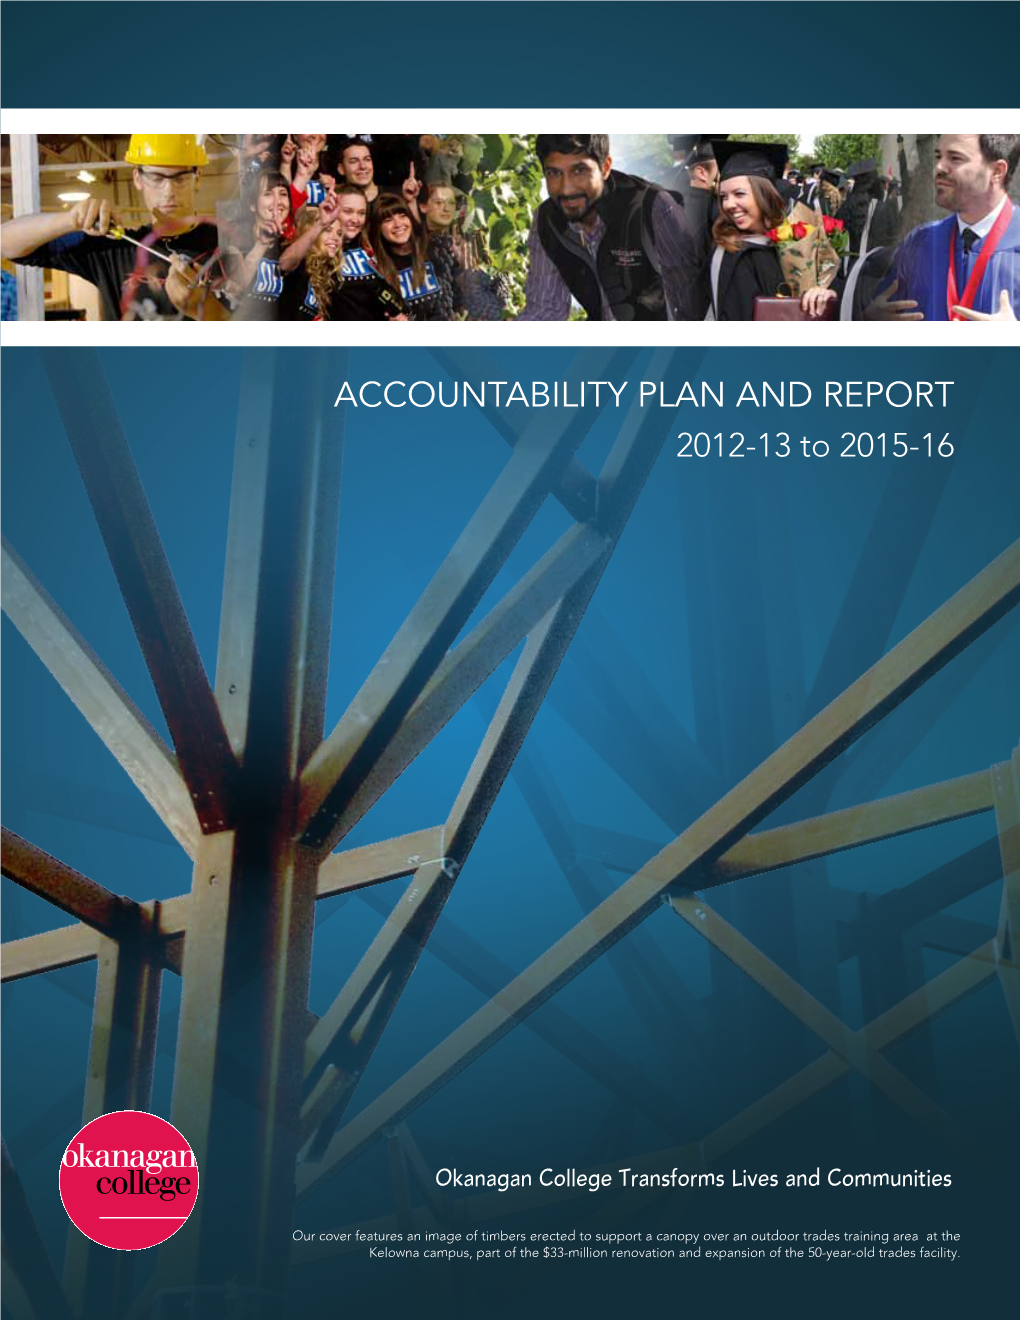 ACCOUNTABILITY PLAN and REPORT 2012-13 to 2015-16